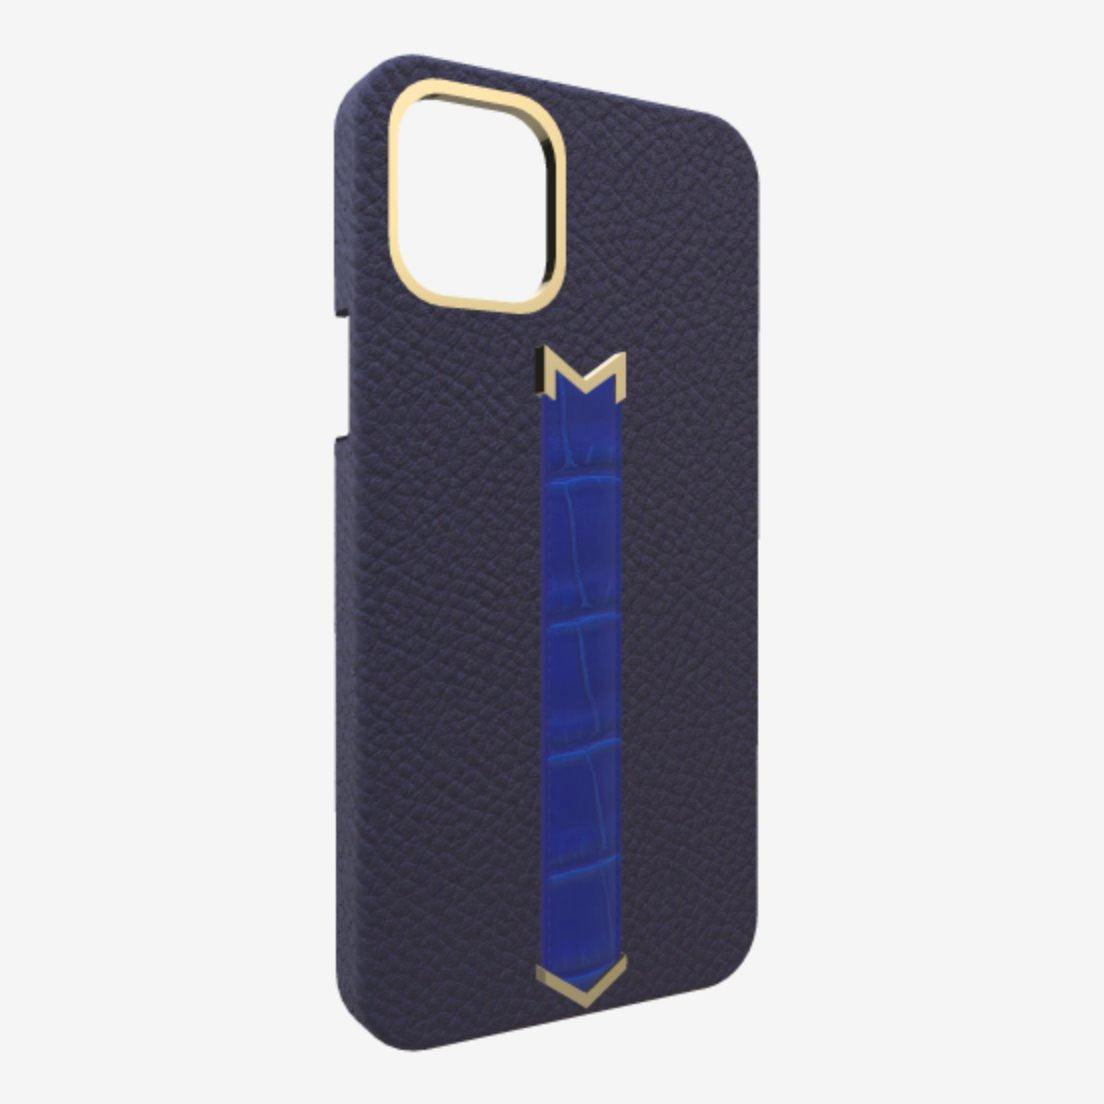 Gold Finger Strap Case for iPhone 13 Pro in Genuine Calfskin and Alligator Navy Blue Electric Blue 